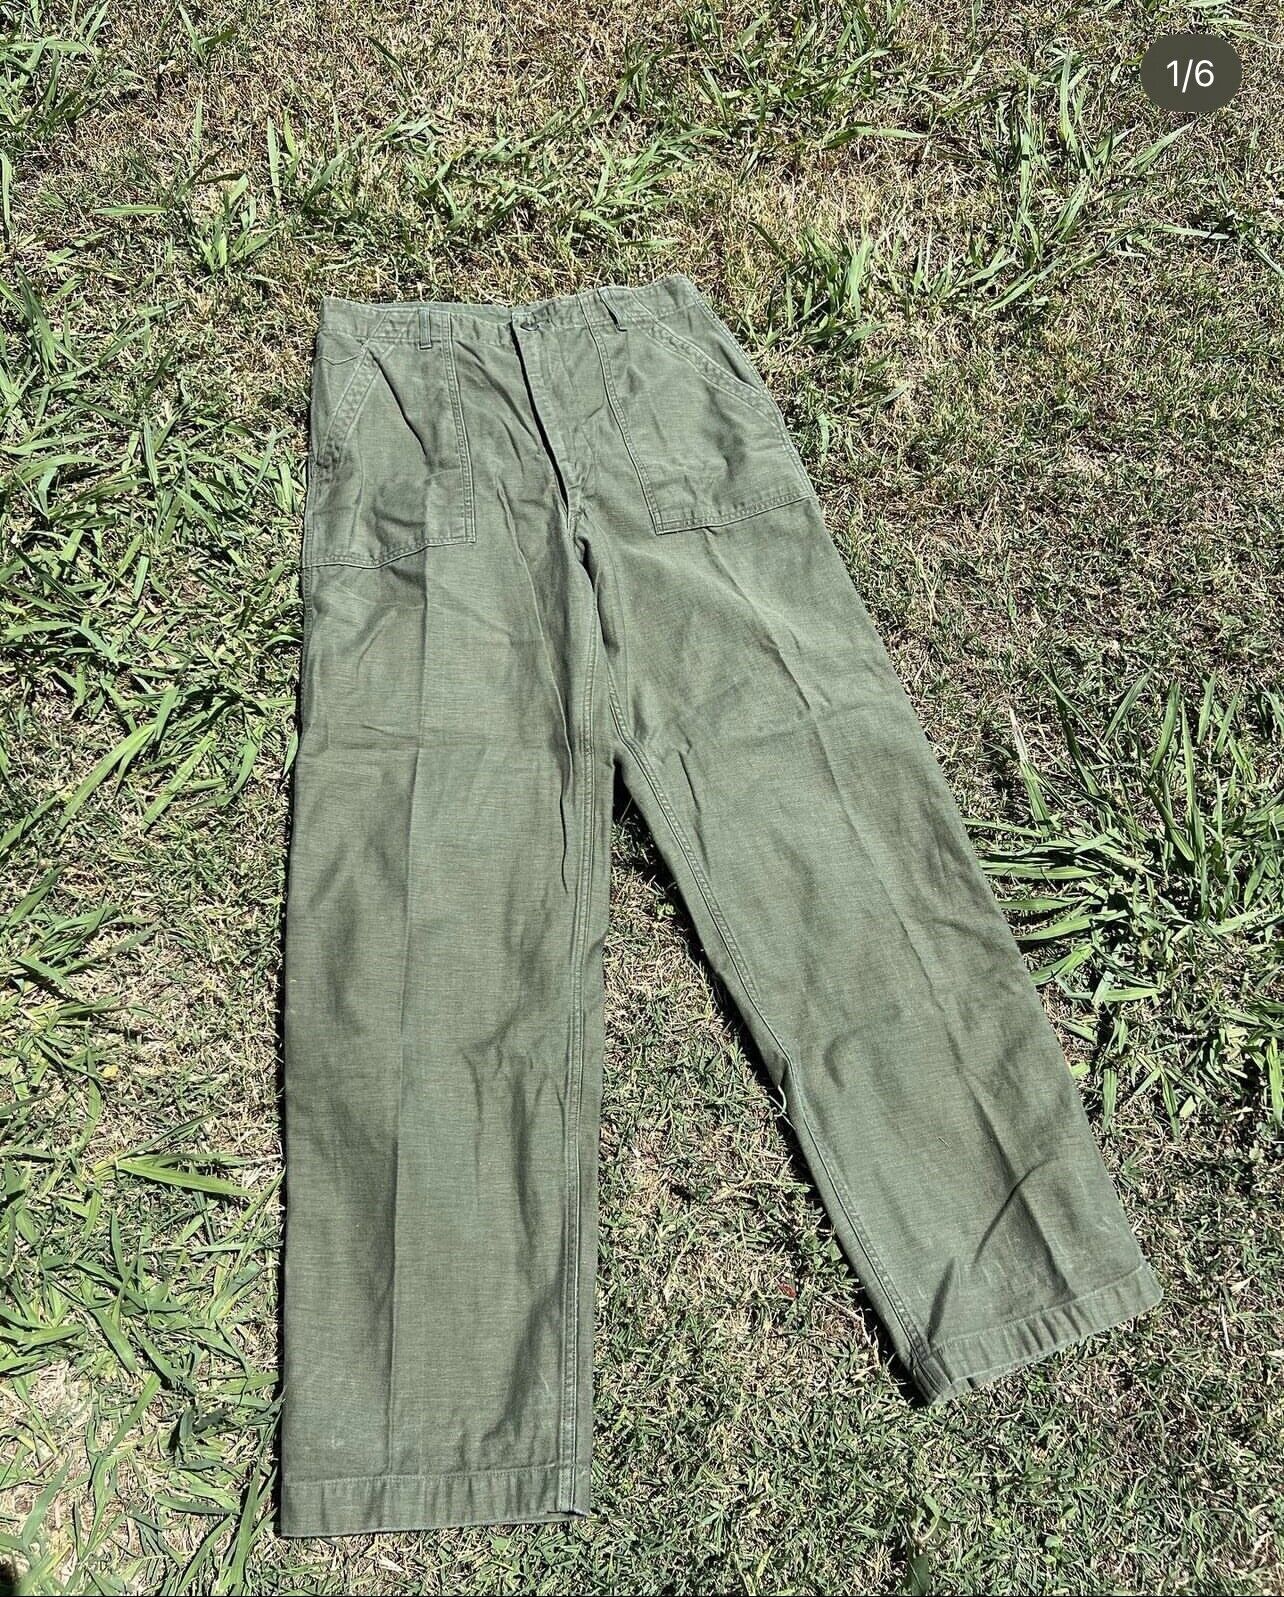 Vintage OG 107 Fatigue Trousers Military Pants 1960s Dark Green 36 X 35